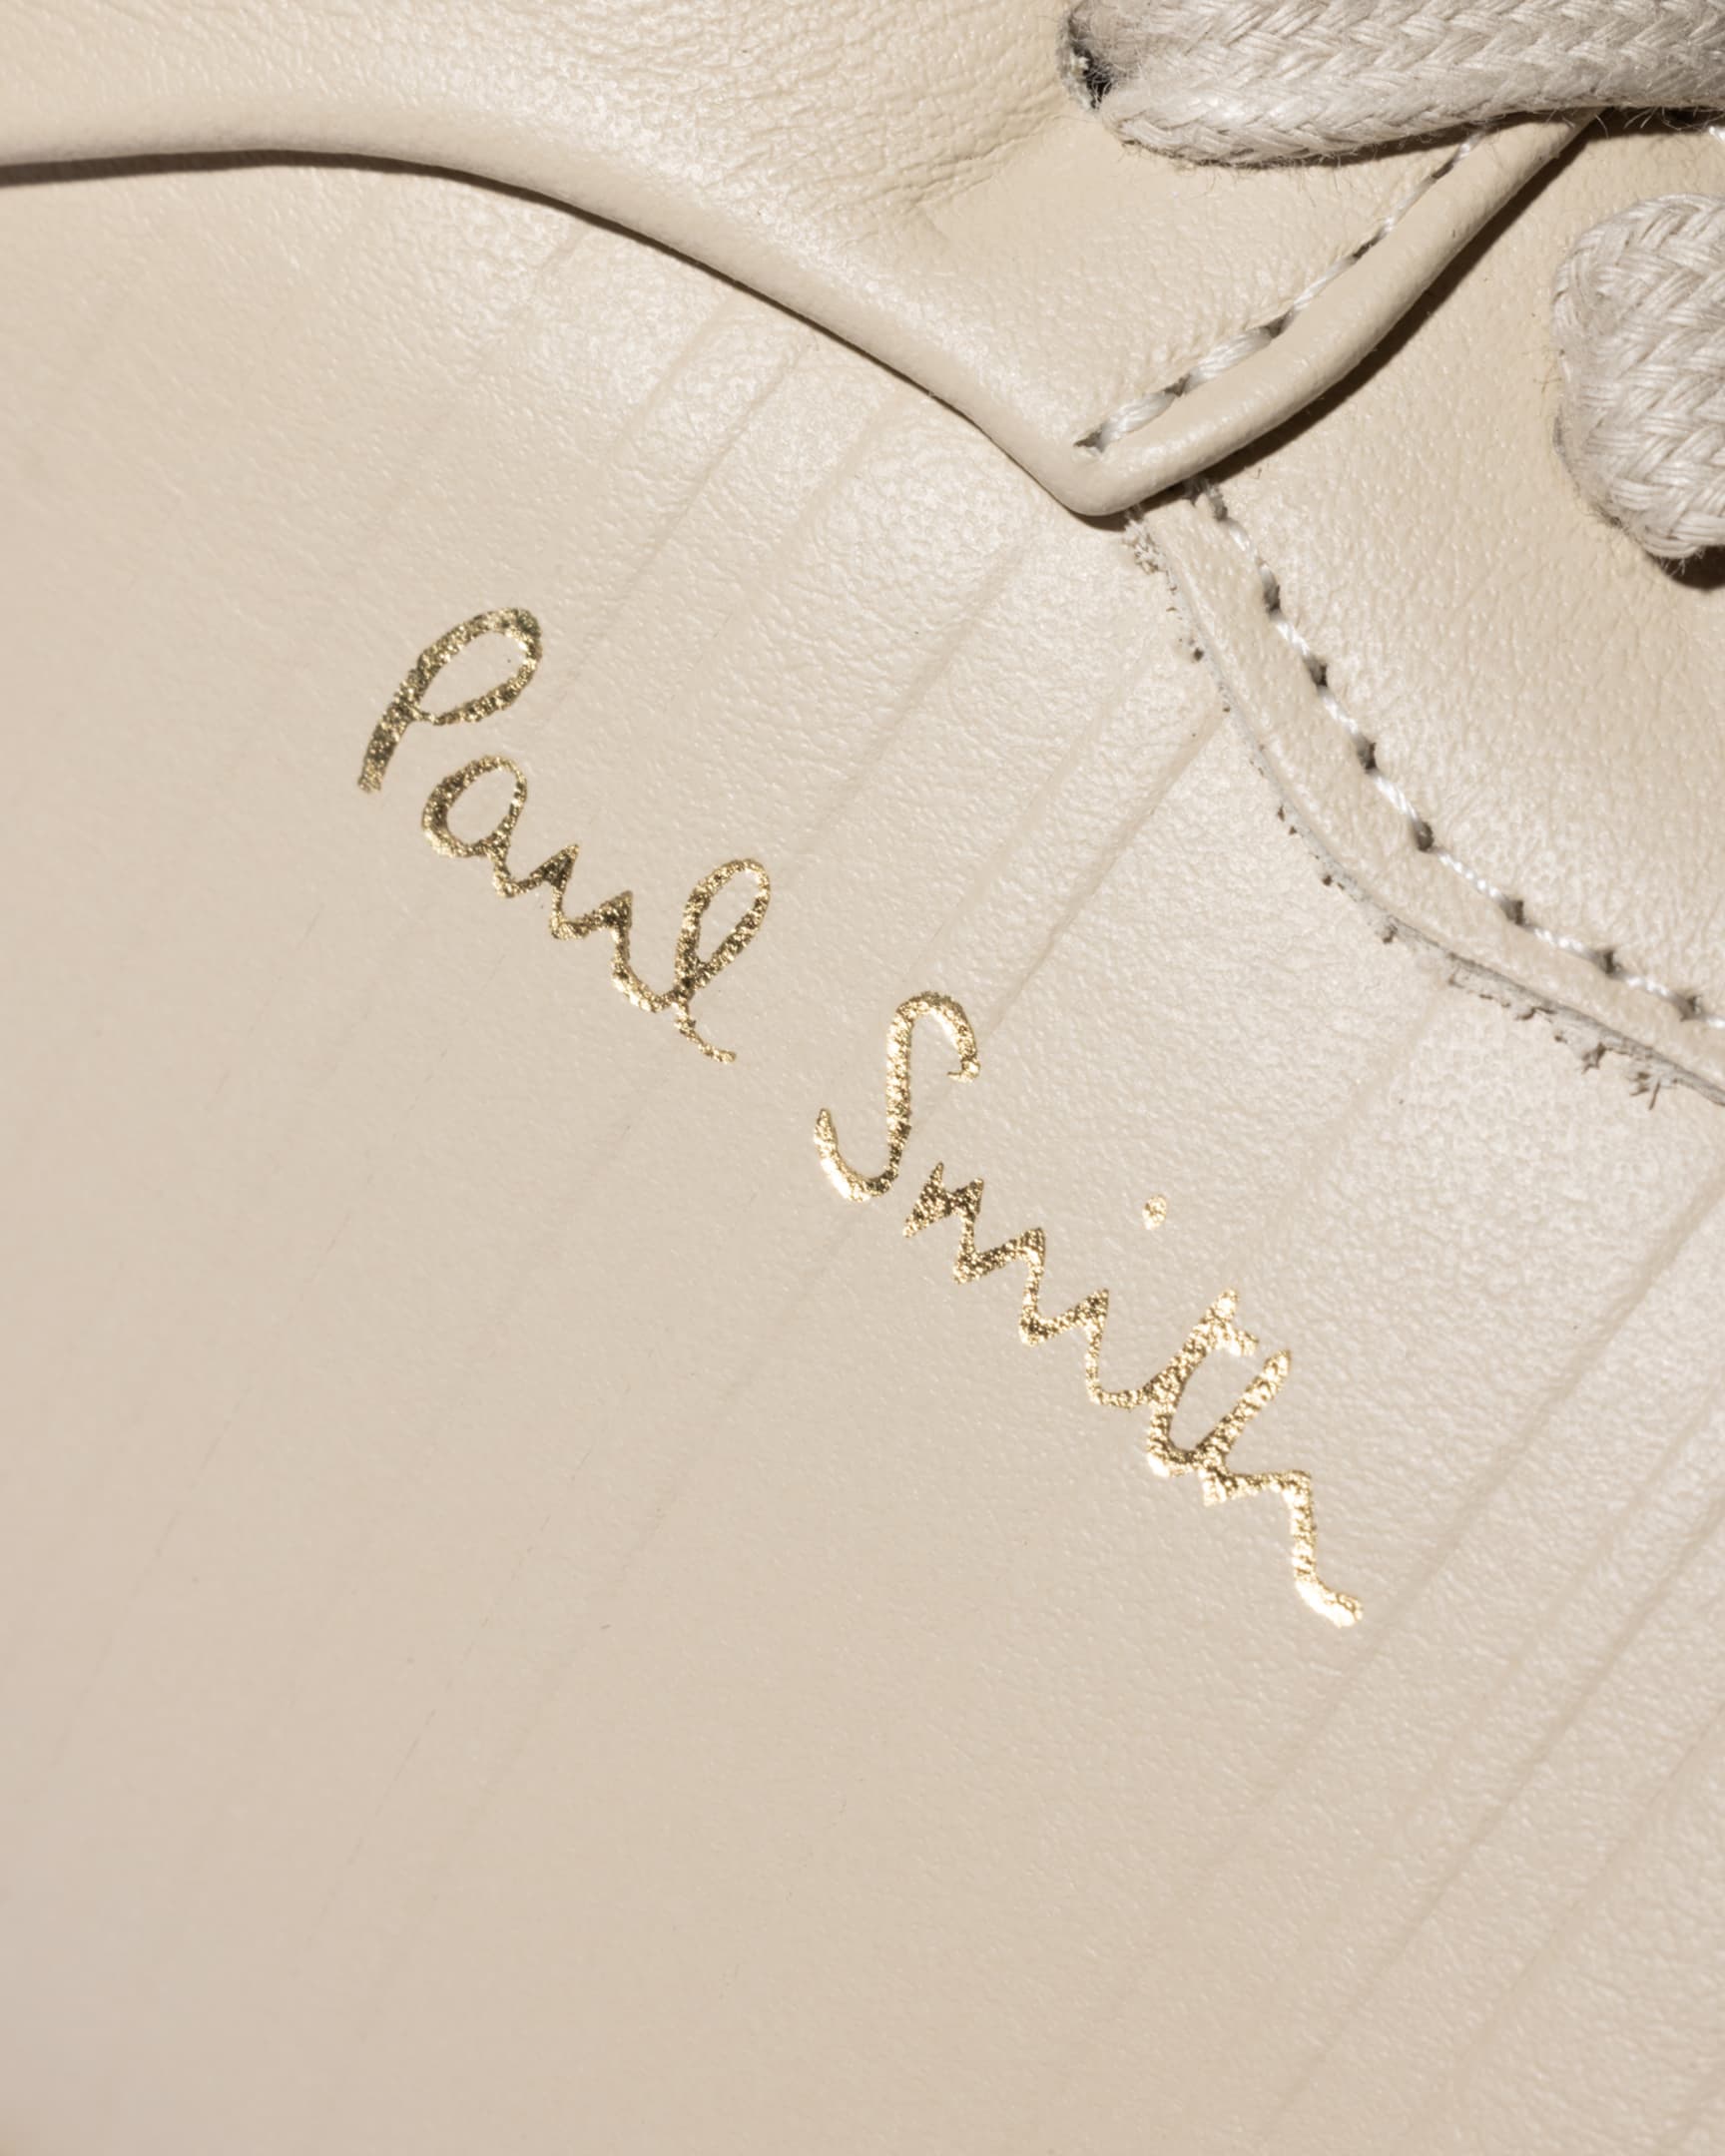 Detail View - Sand 'Eighty Five' Leather Trainers Paul Smith